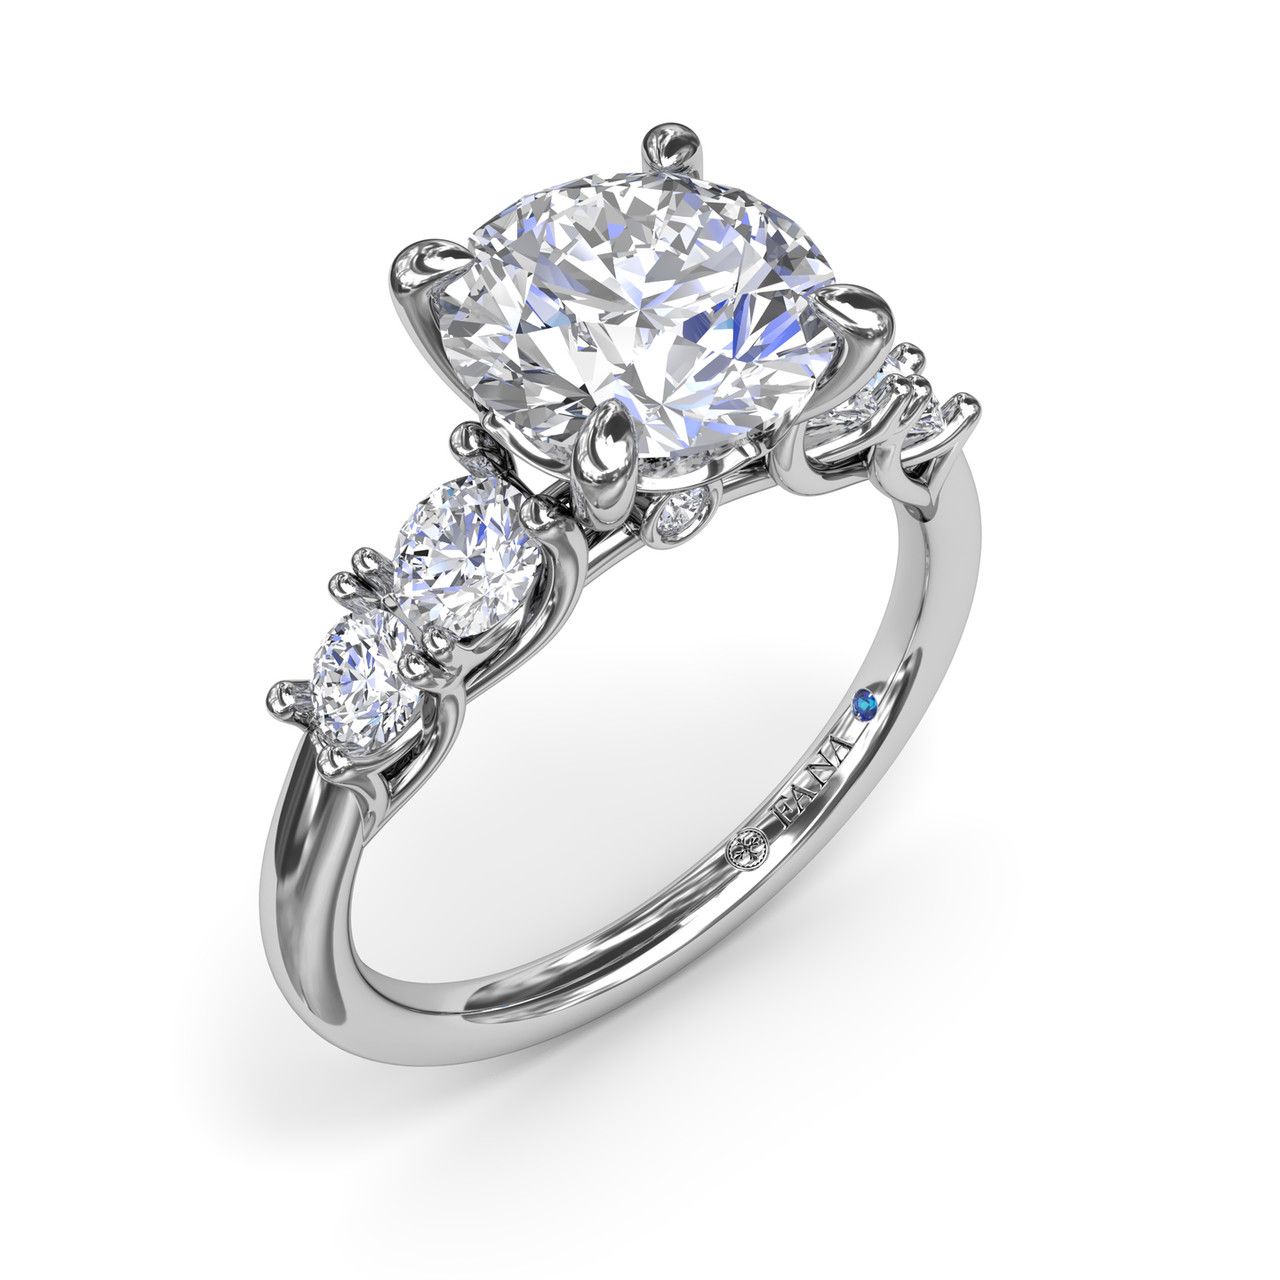 14K WHITE GOLD SEMI-MOUNT RING SIZE 6.5 WITH 6=0.55TW ROUND G-H VS2-SI1 DIAMONDS AND ONE ROUND BLUE SAPPHIRE    (3.41 GRAMS)